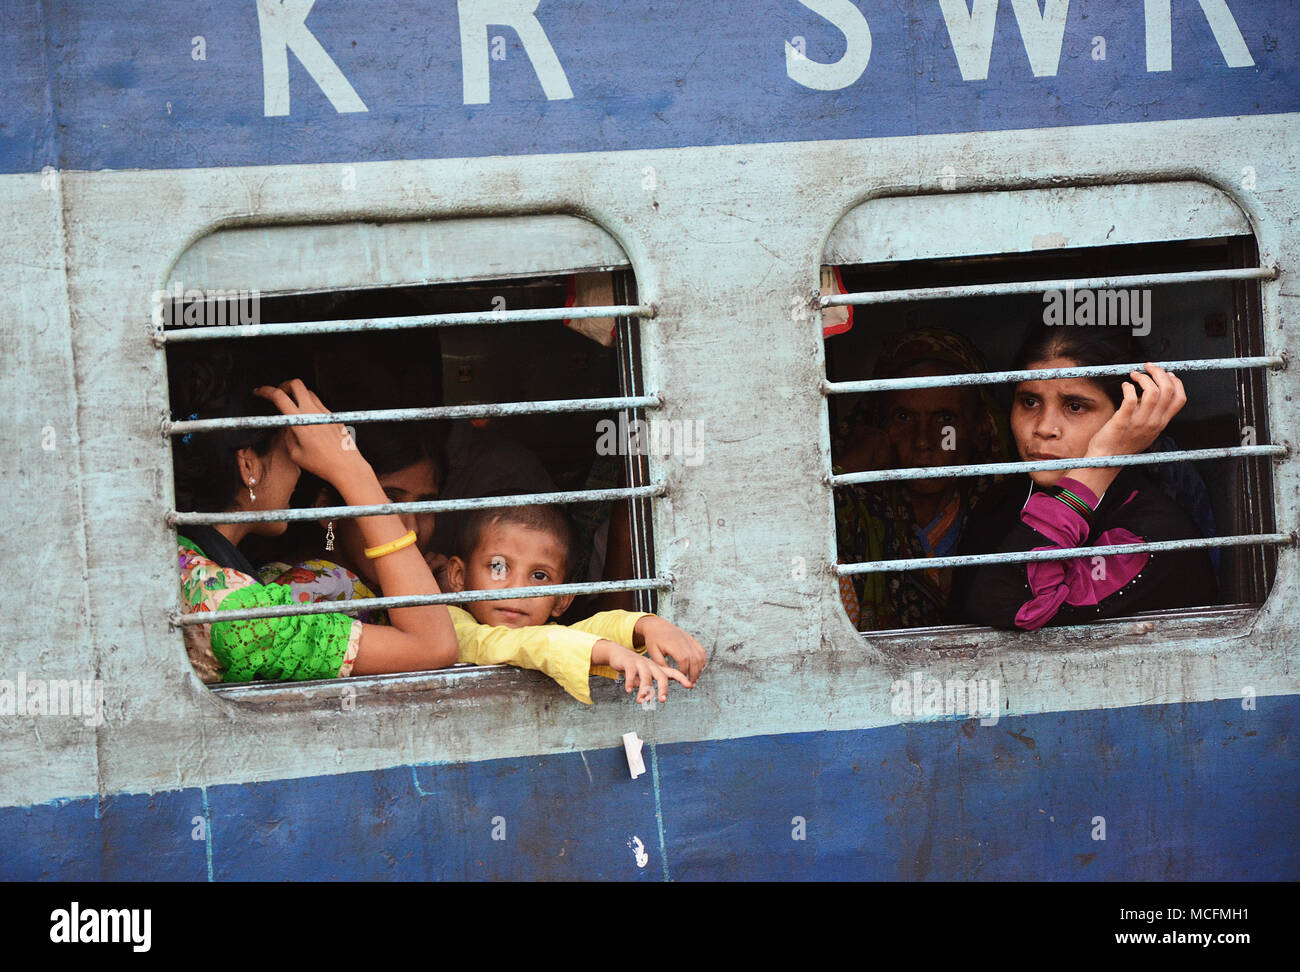 A family seen through the bars of a window on a train in India, Mumbai bound Stock Photo